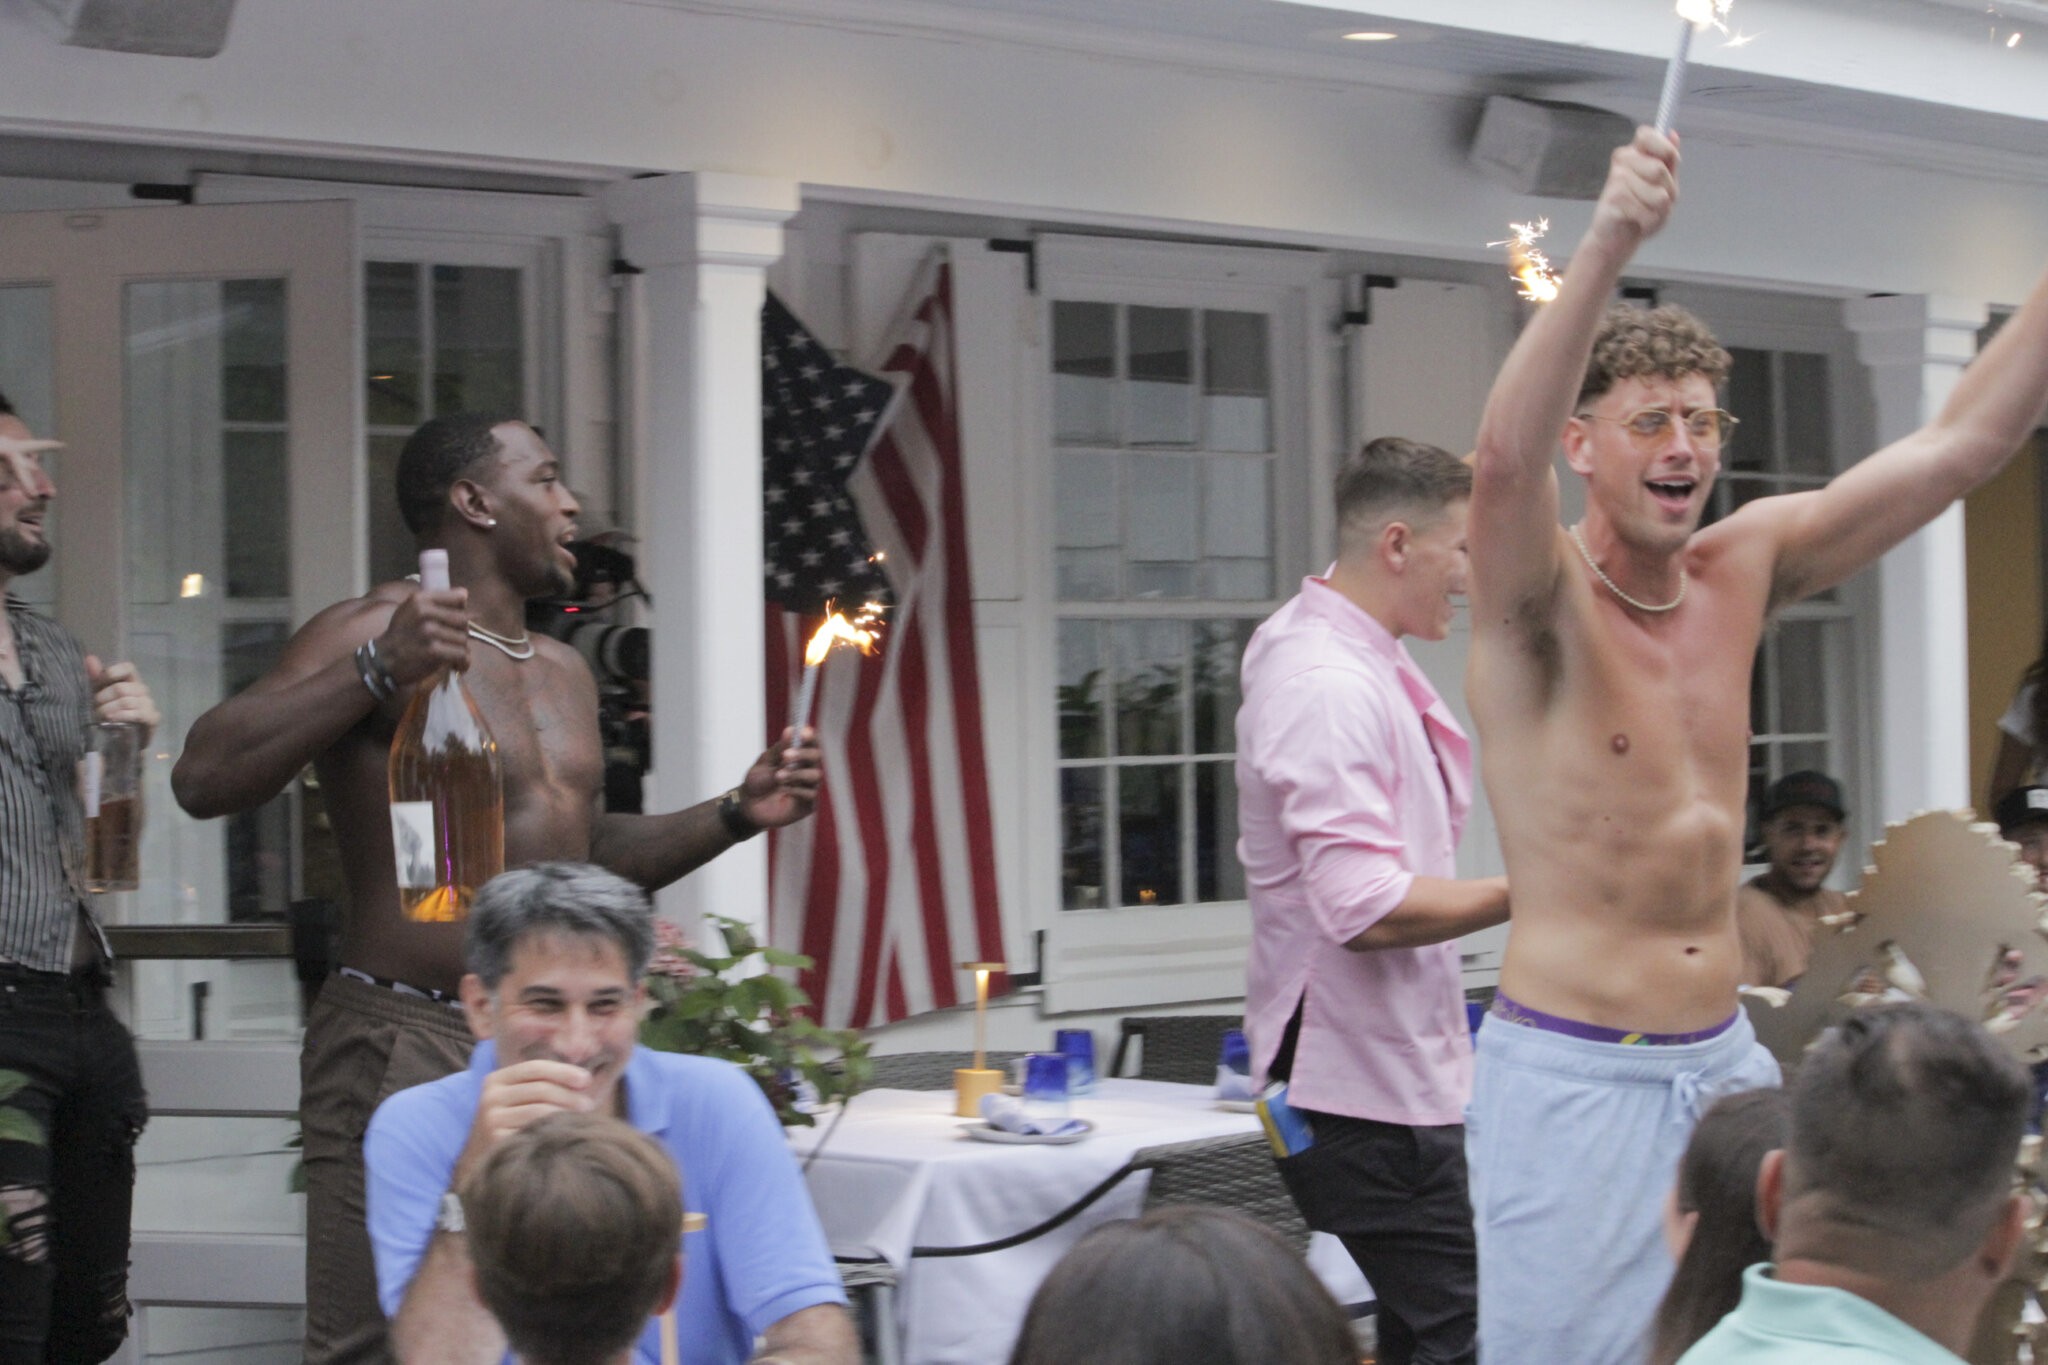 The men of 75 Main add some flare as they serve dishes at the LGBTQ event in the Hamptons Serving the Hamptons Season 2